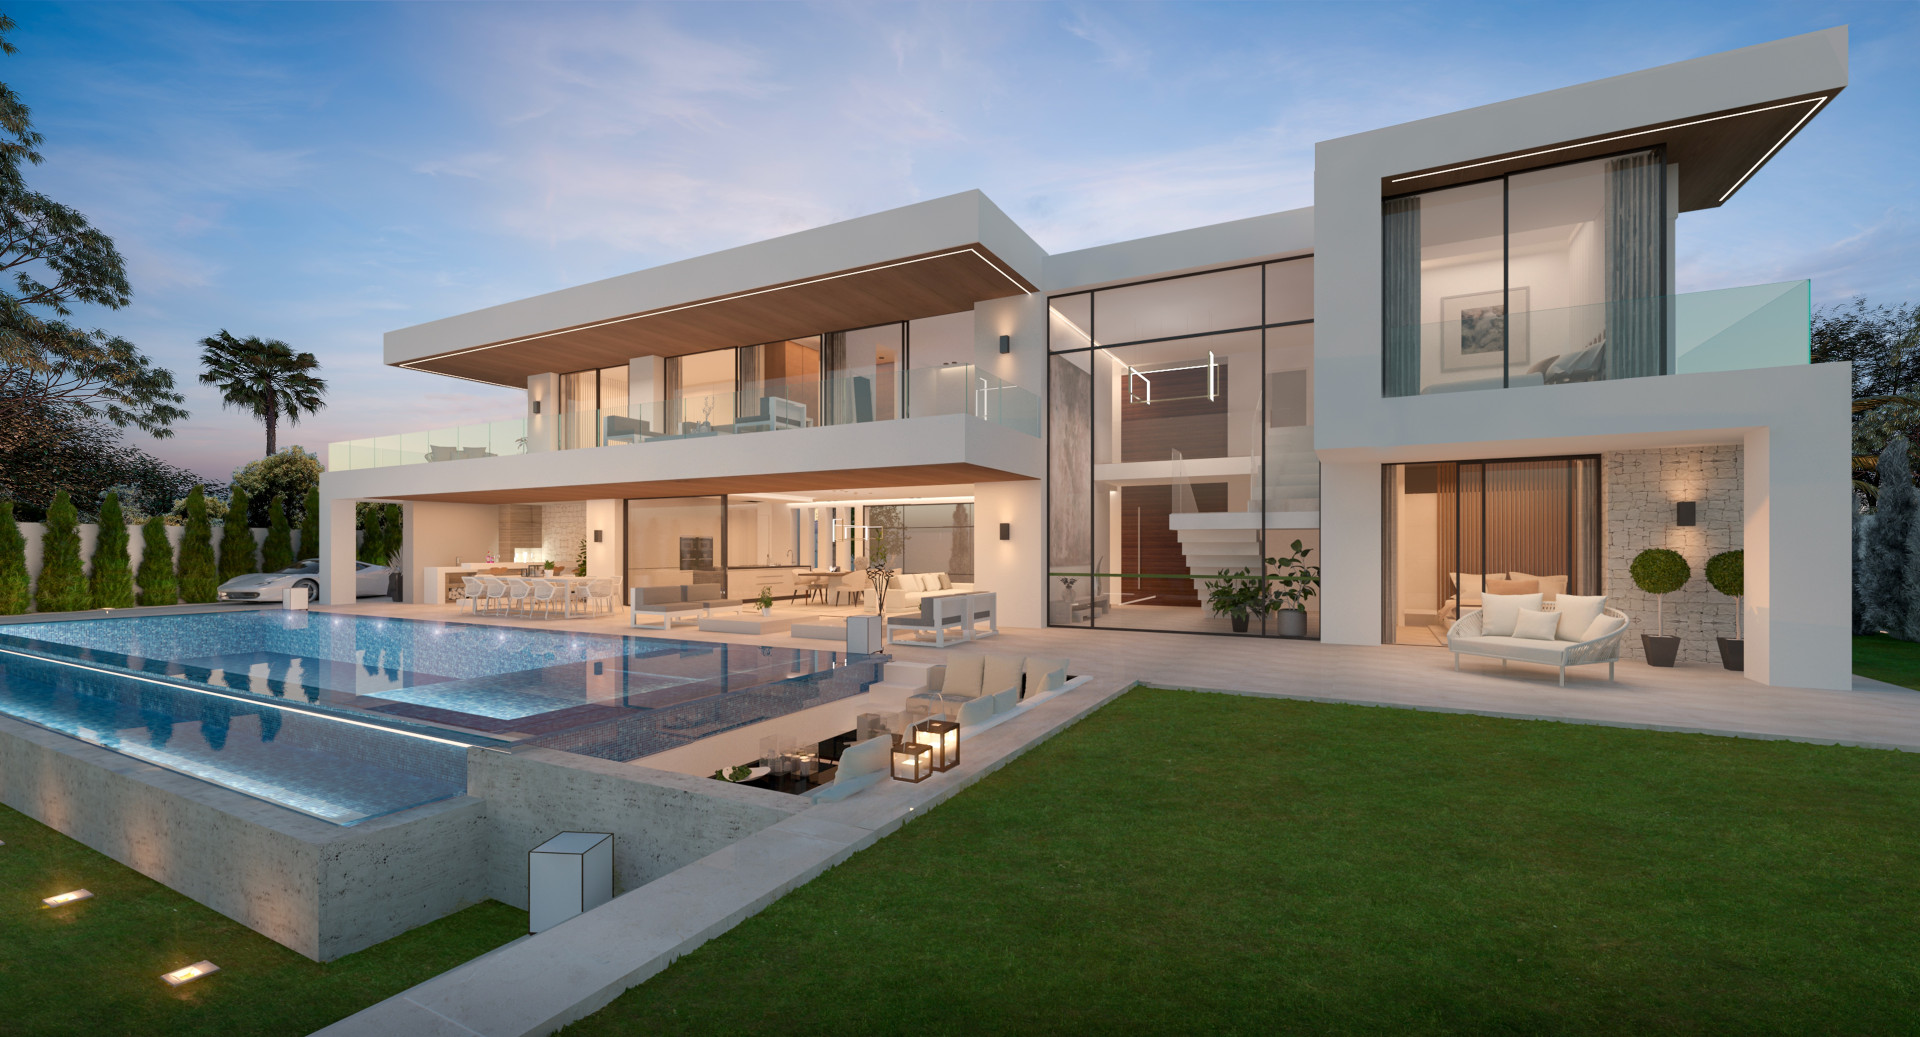 Off-plan contemporary villa just a few meters to the beach in Guadalmina Baja.